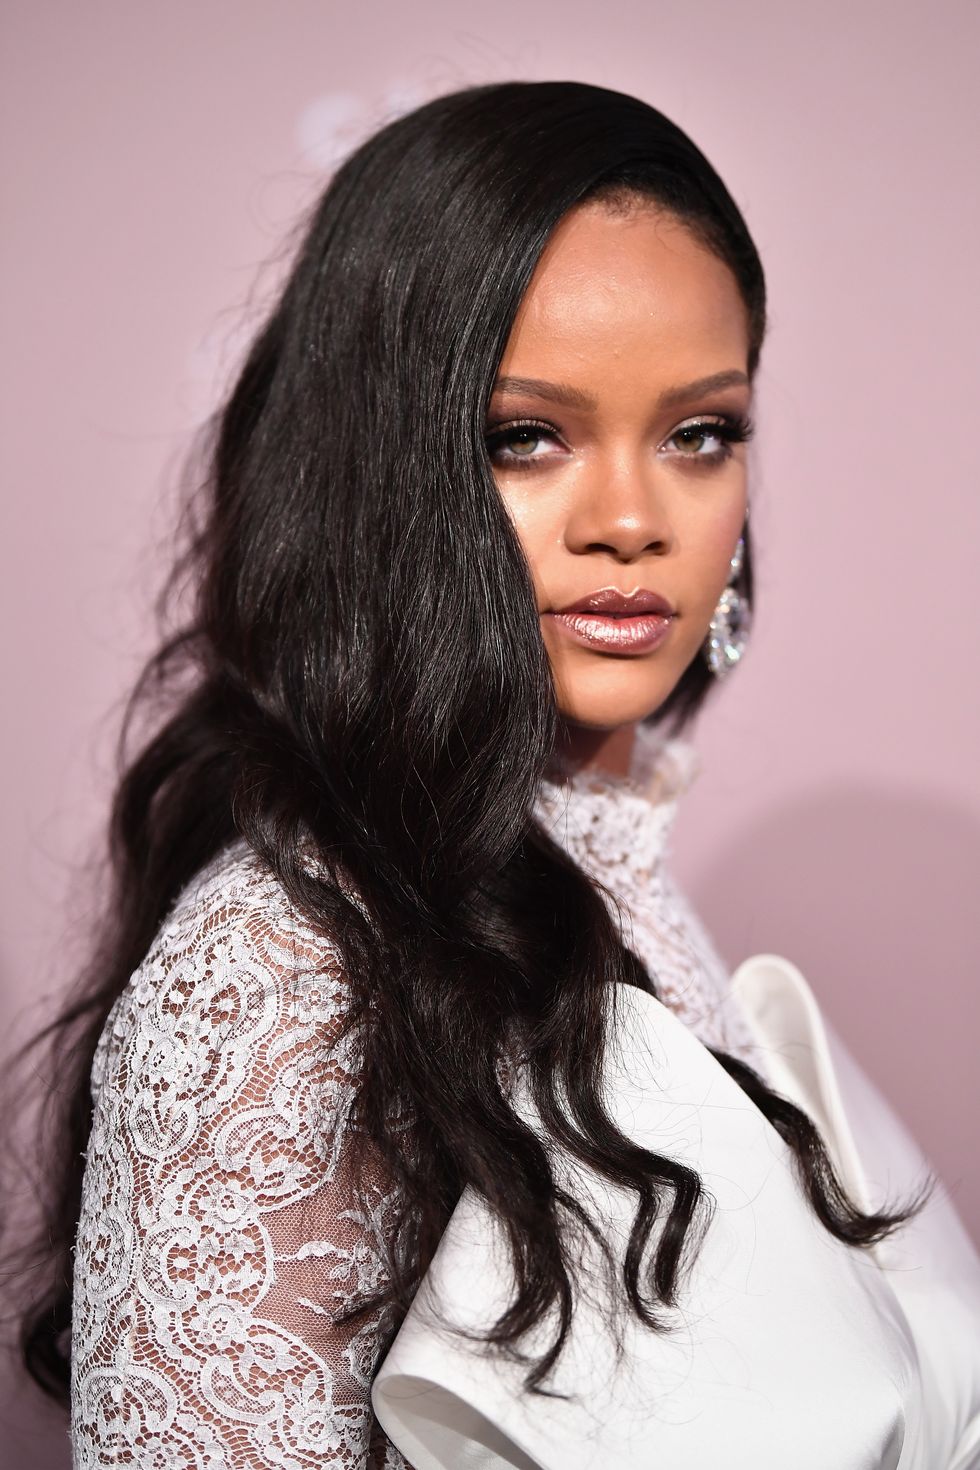 new york, ny september 13 rihanna attends rihannas 4th annual diamond ball benefitting the clara lionel foundation at cipriani wall street on september 13, 2018 in new york city photo by dimitrios kambourisgetty images for diamond ball